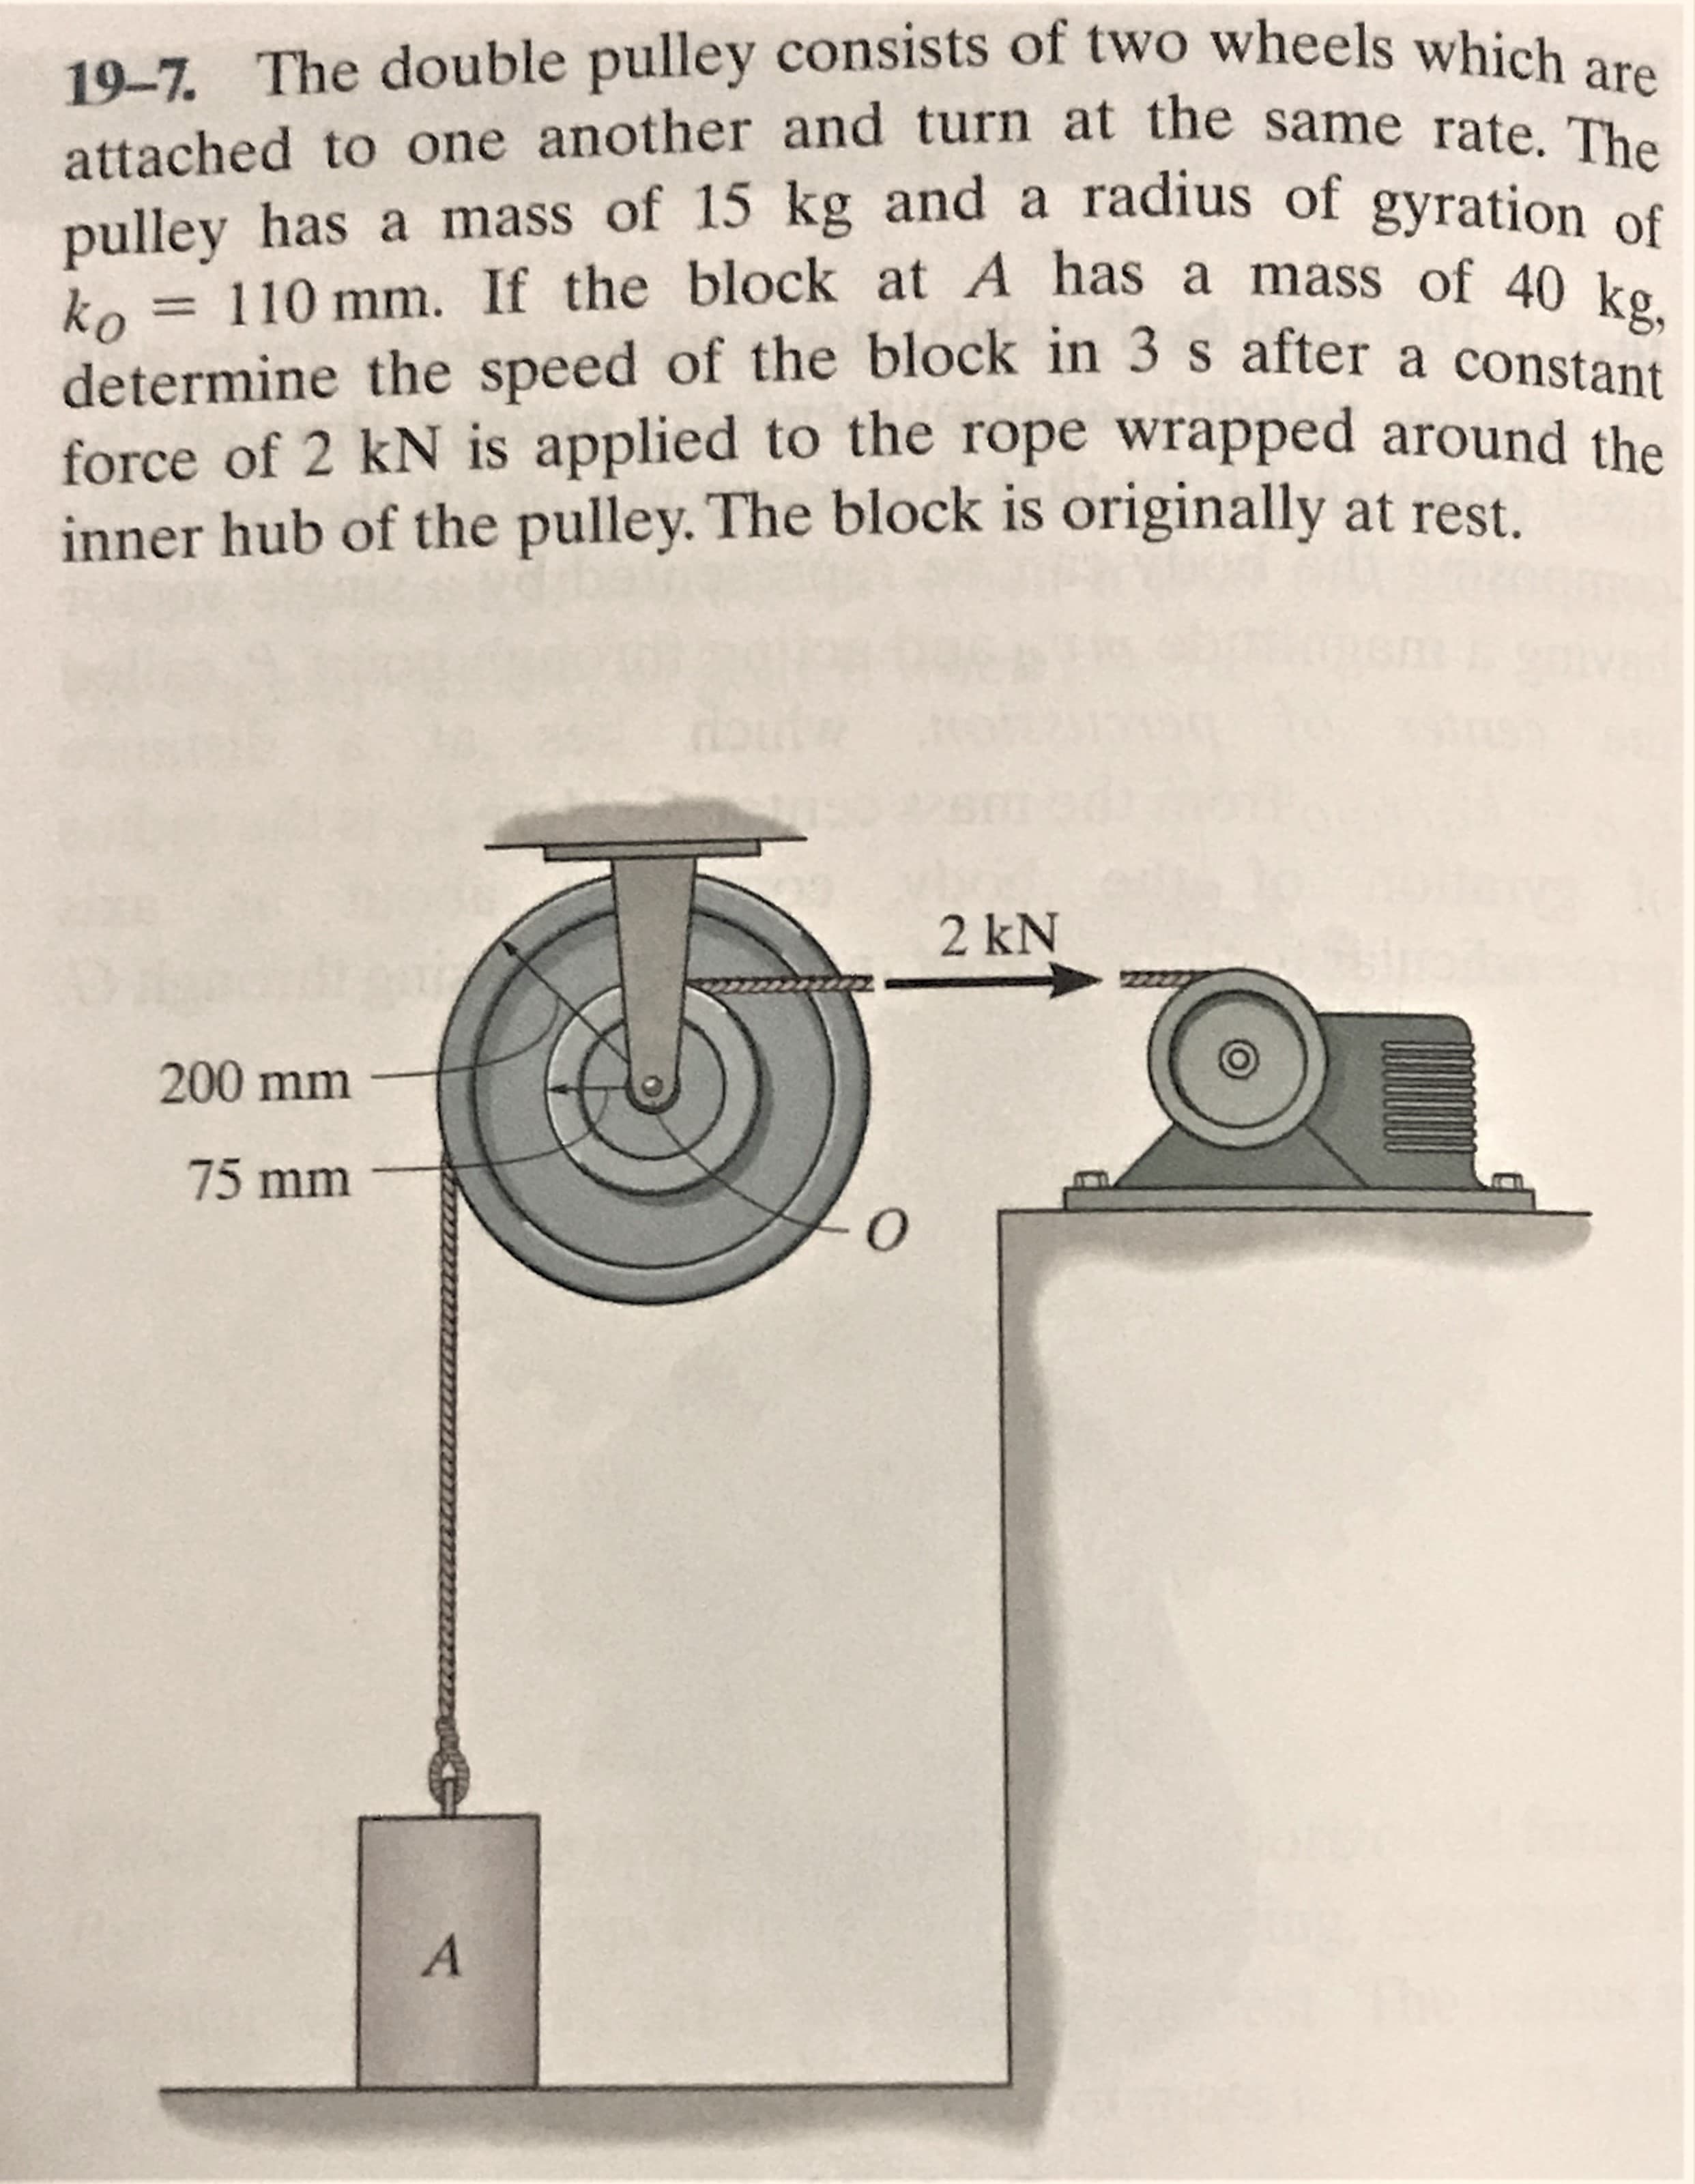 19-7. The double pulley consists of two wheels which are
attached to one another and turn at the same rate. The
pulley has a mass of 15 kg and a radius of gyration of
110 mm. If the block at A has a mass of 40 kg,
ko
determine the speed of the block in 3s after a constant
force of 2 kN is applied to the rope wrapped around the
inner hub of the pulley. The block is originally at rest.
2 kN
200 mm
75 mm
